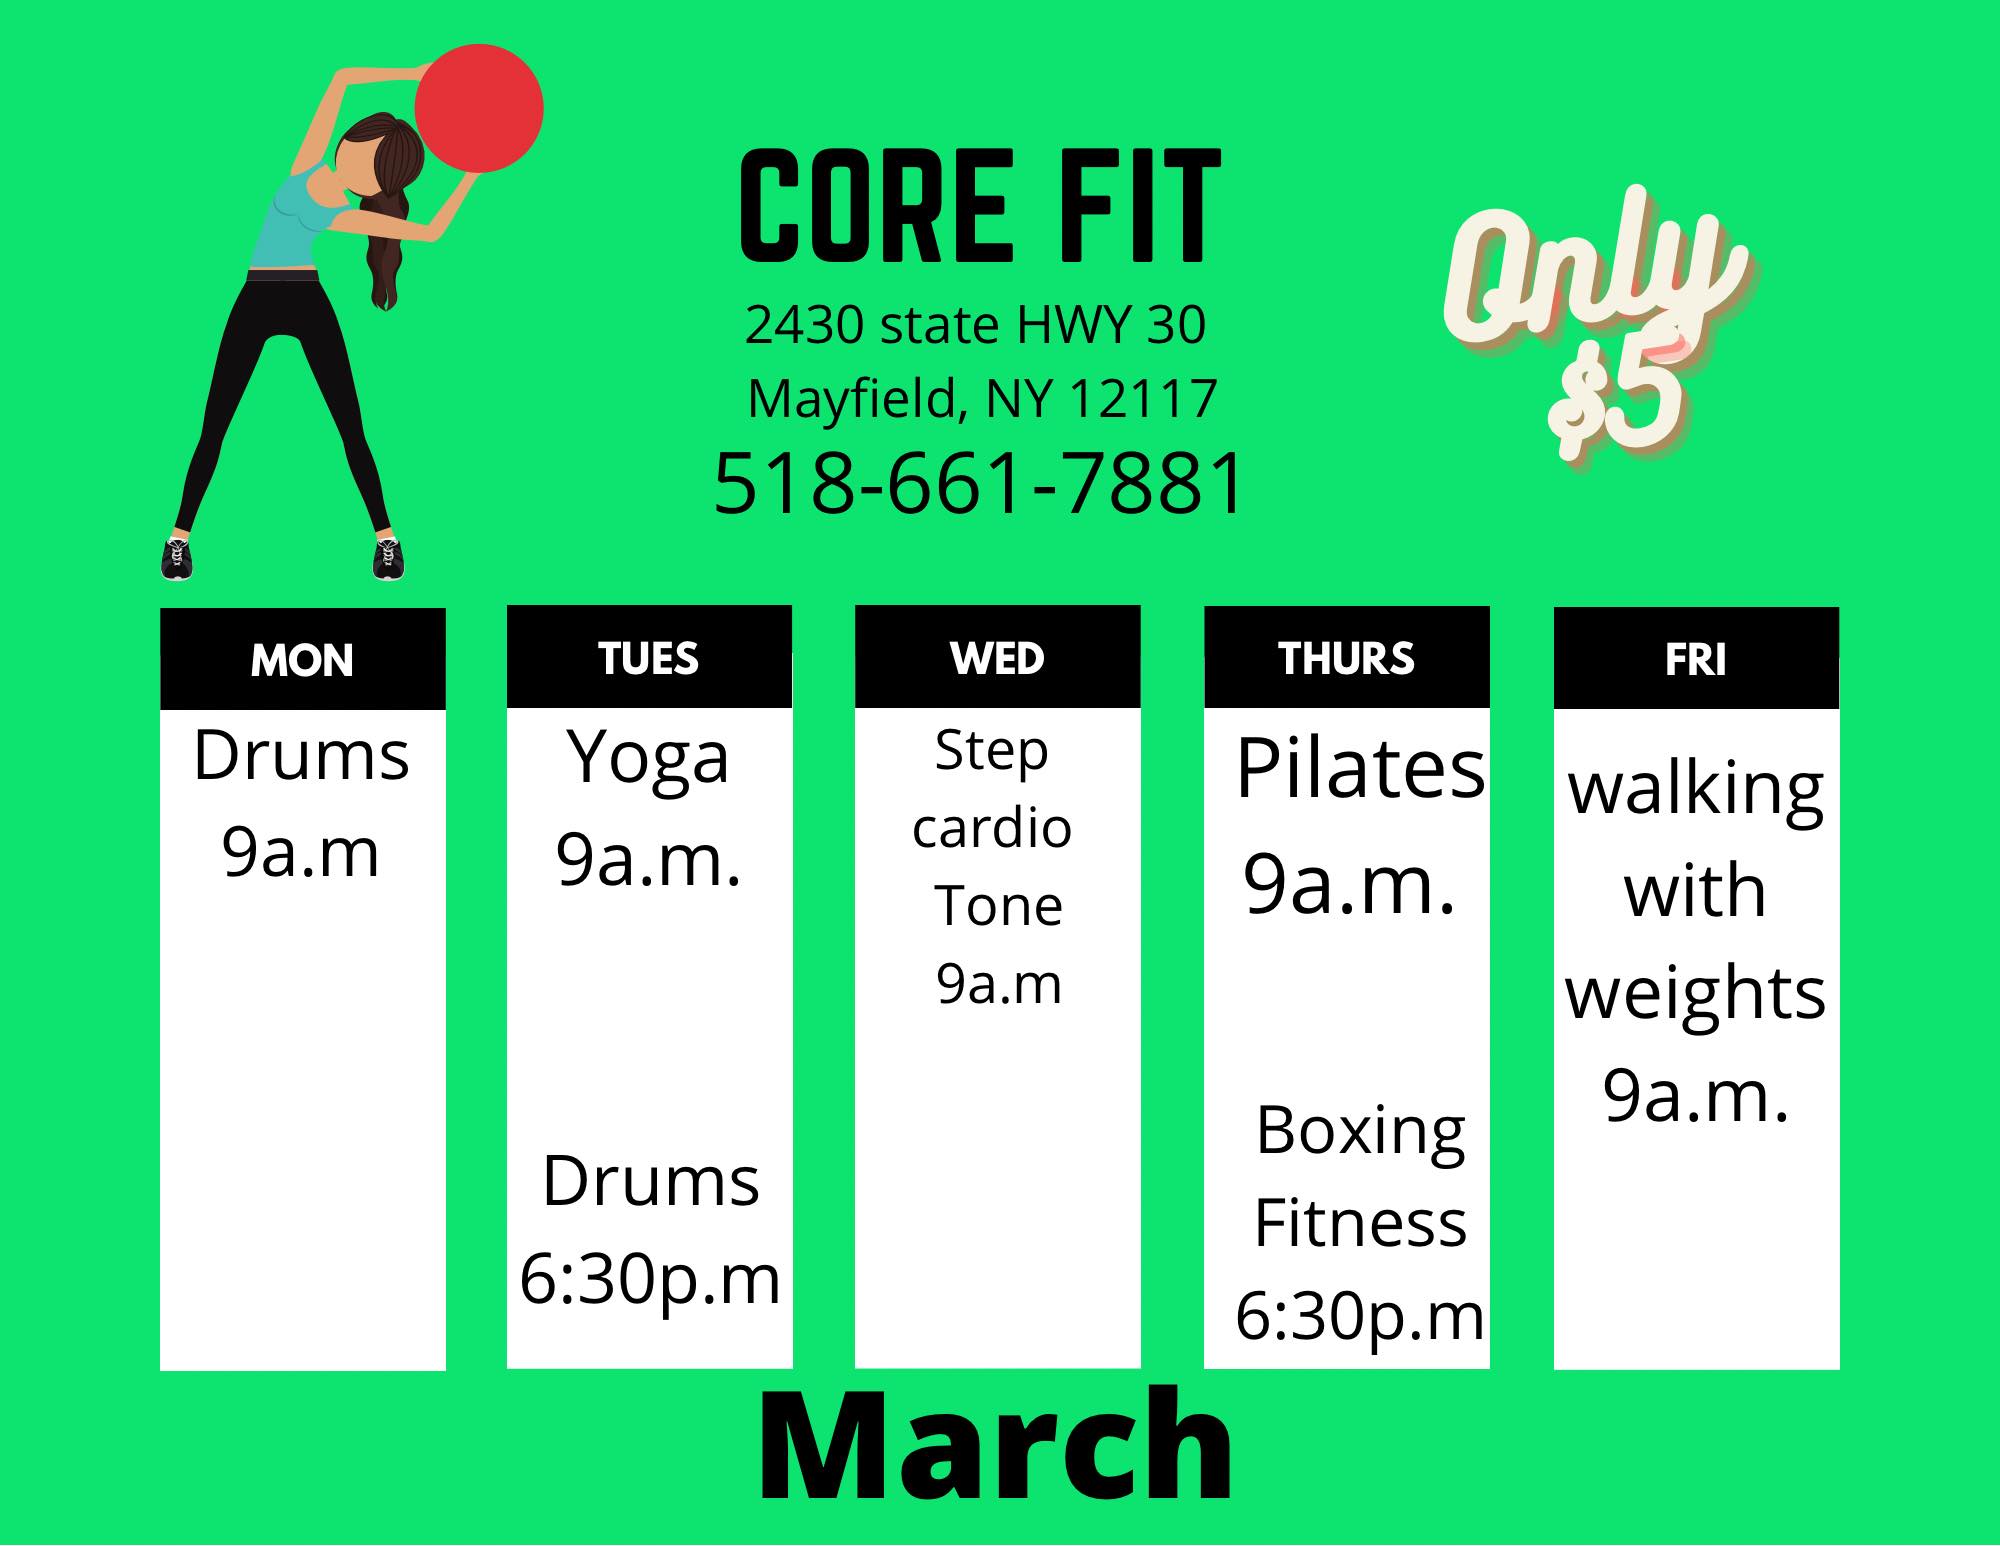 Core Fit 2430 NY-30, Mayfield New York 12117